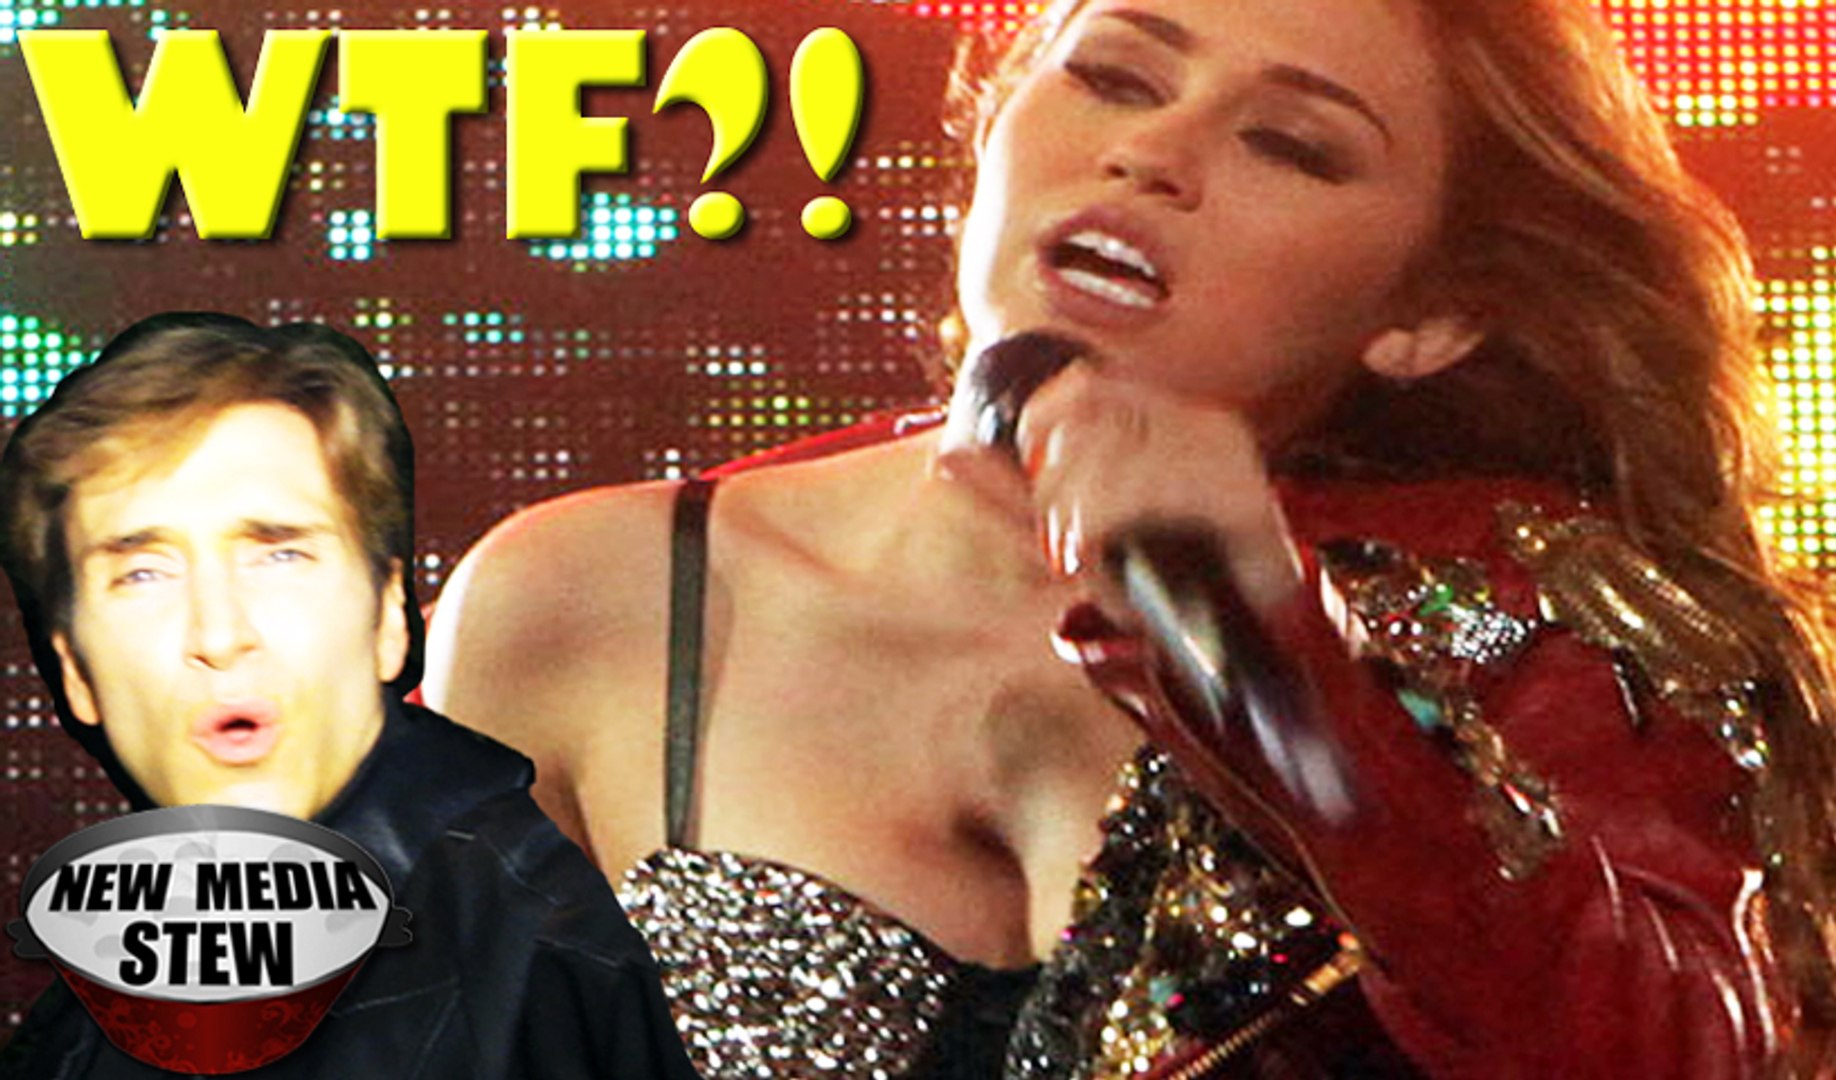 MILEY CYRUS Flashes Breasts on South American Tour WTF